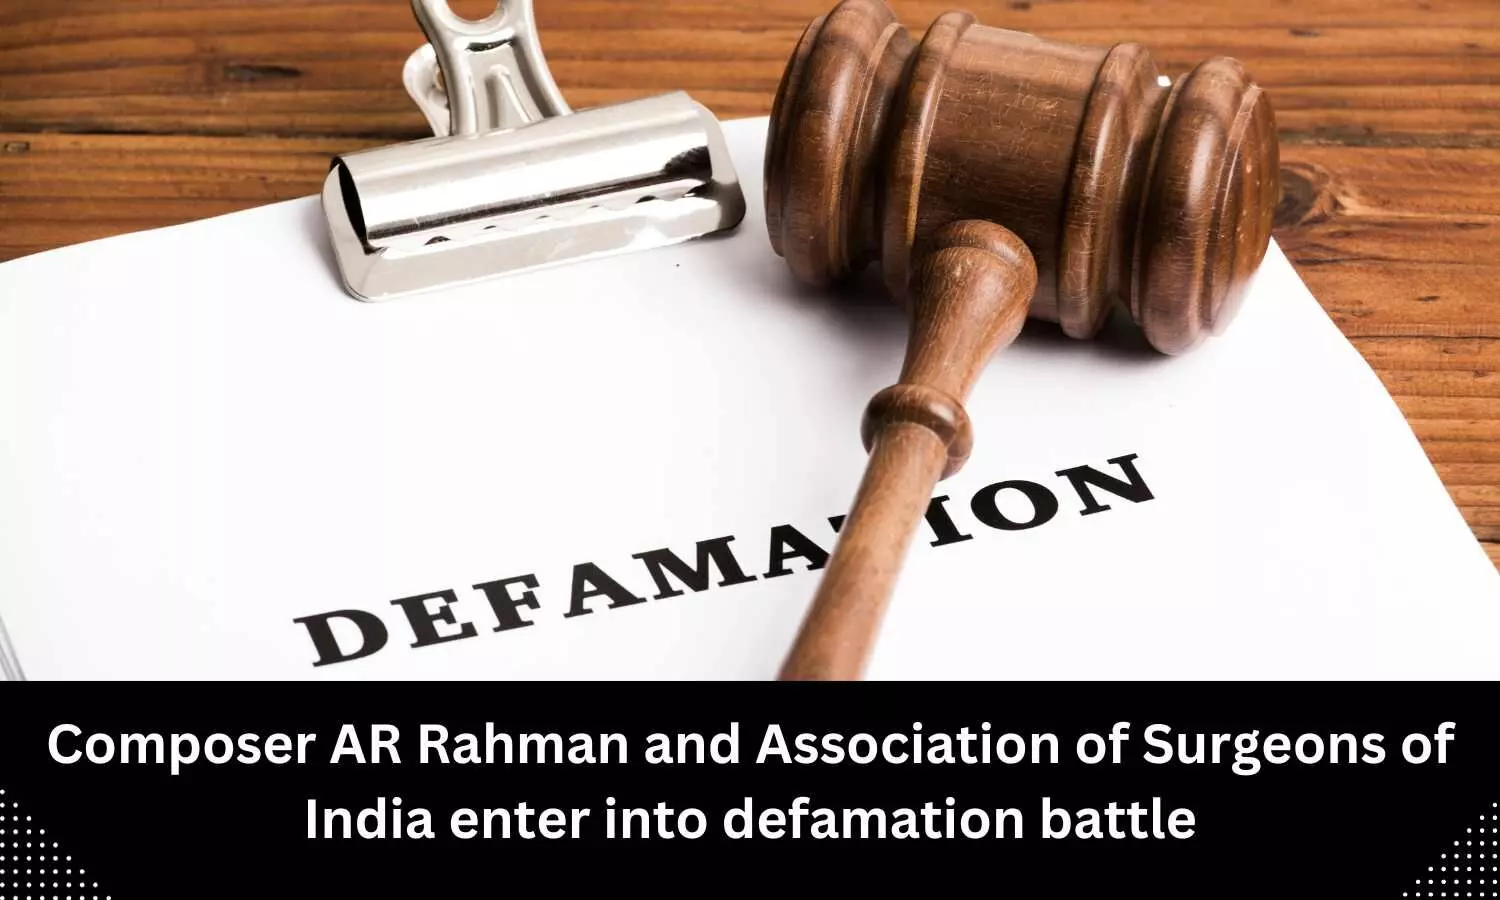 Association of Surgeons of India and Composer AR Rahman enter into defamation battle